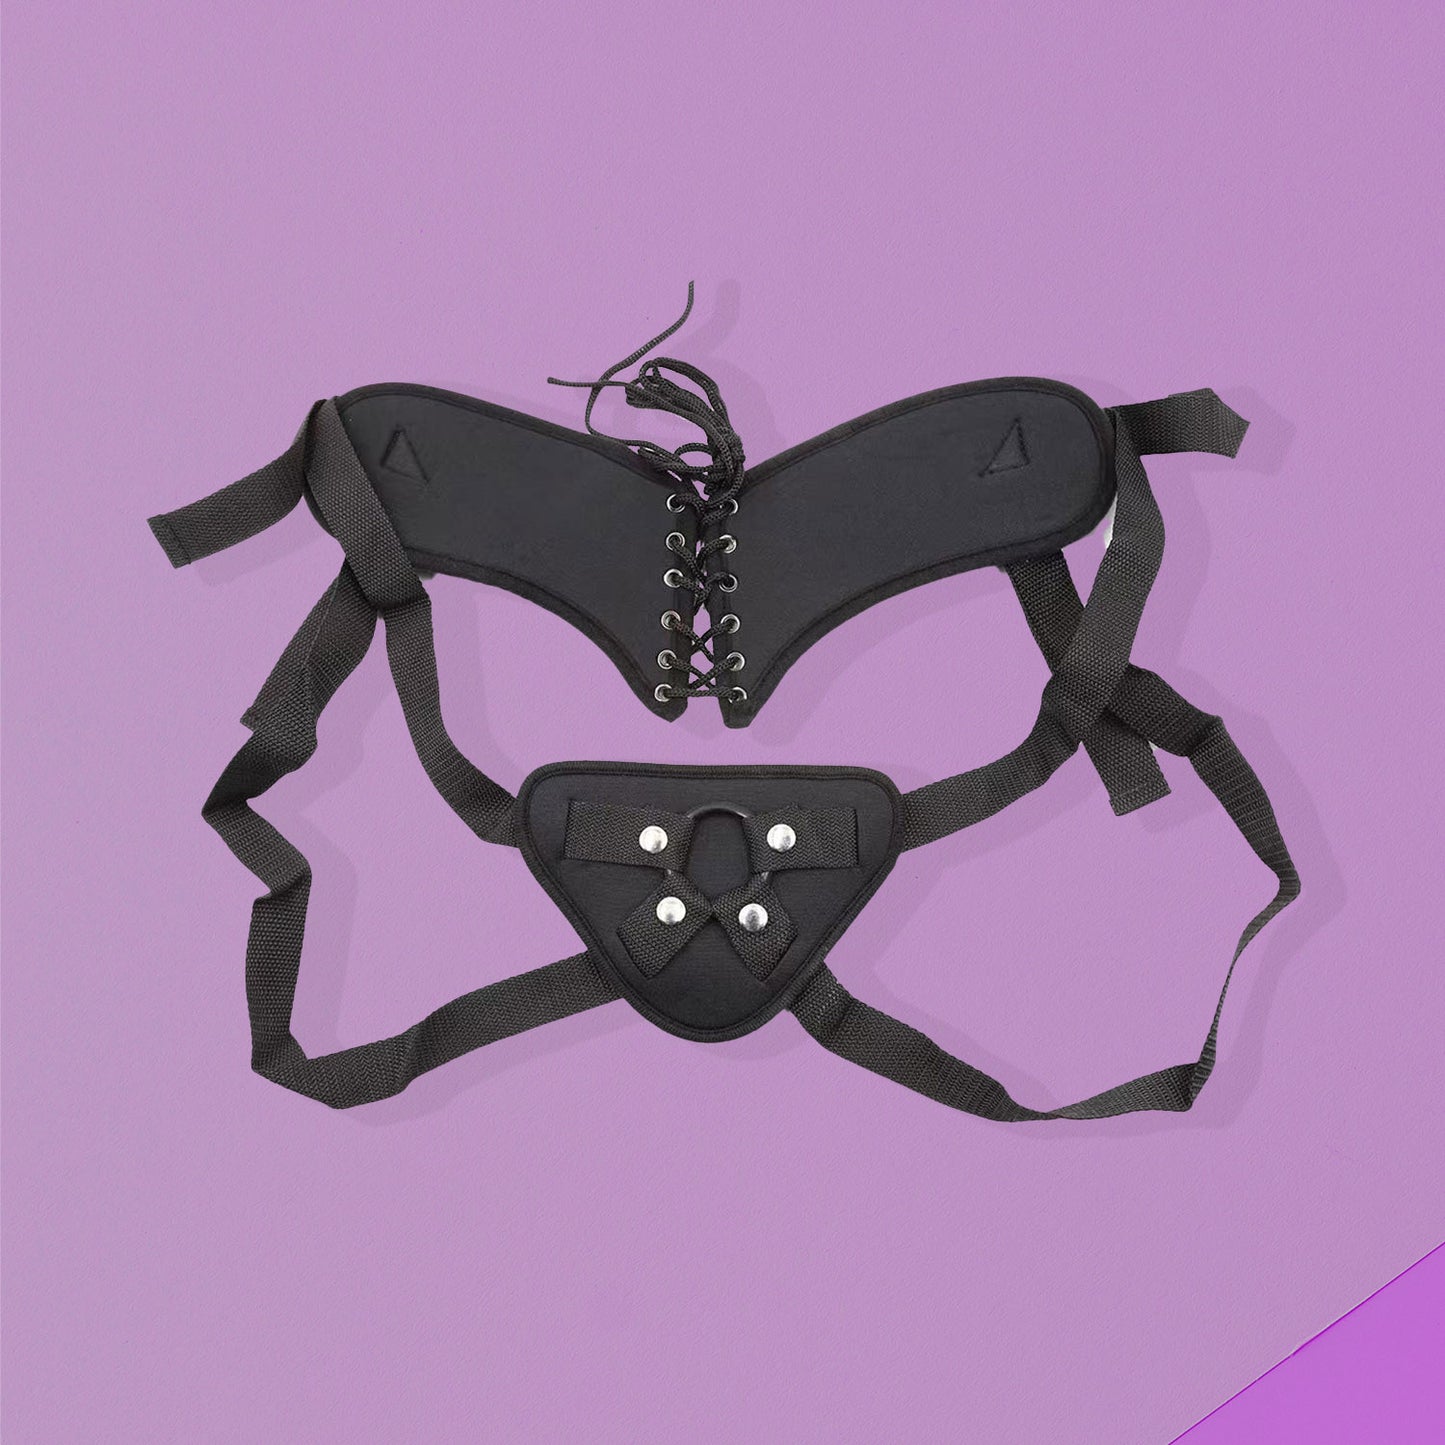 The Horny Company - Black Dragon Strap-on Harness with Lace Details